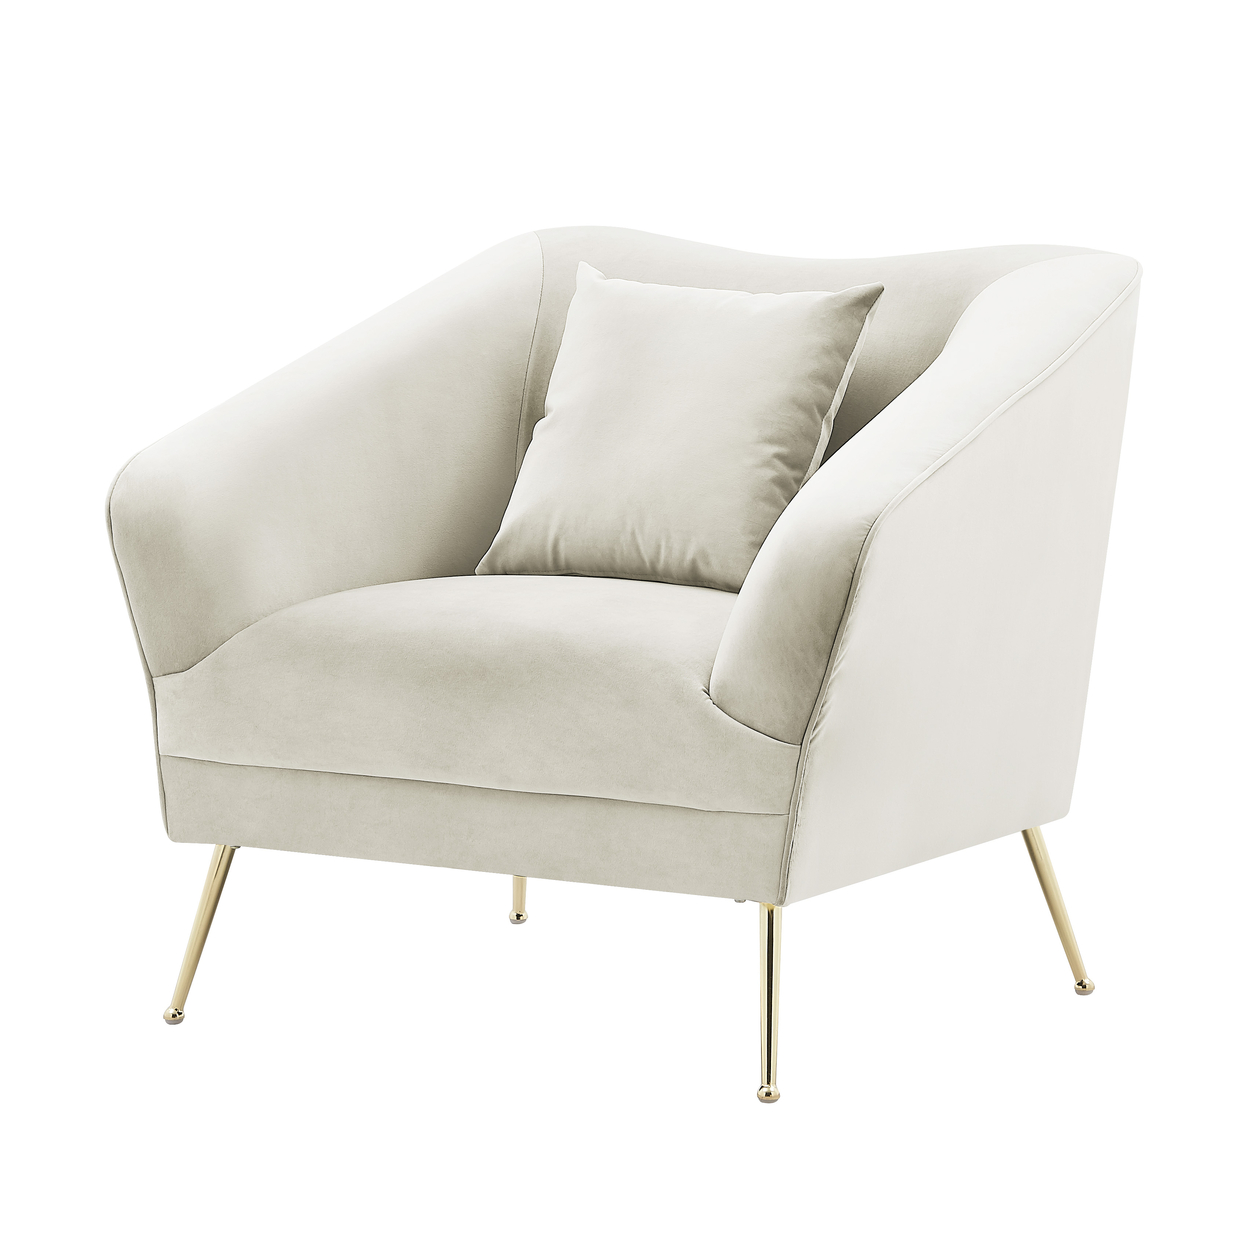 Iconic Home Ember Club Chair Velvet Upholstered Tight Seat Back Design Flared Gold Tone Metal Legs With Decorative Pillow - Beige